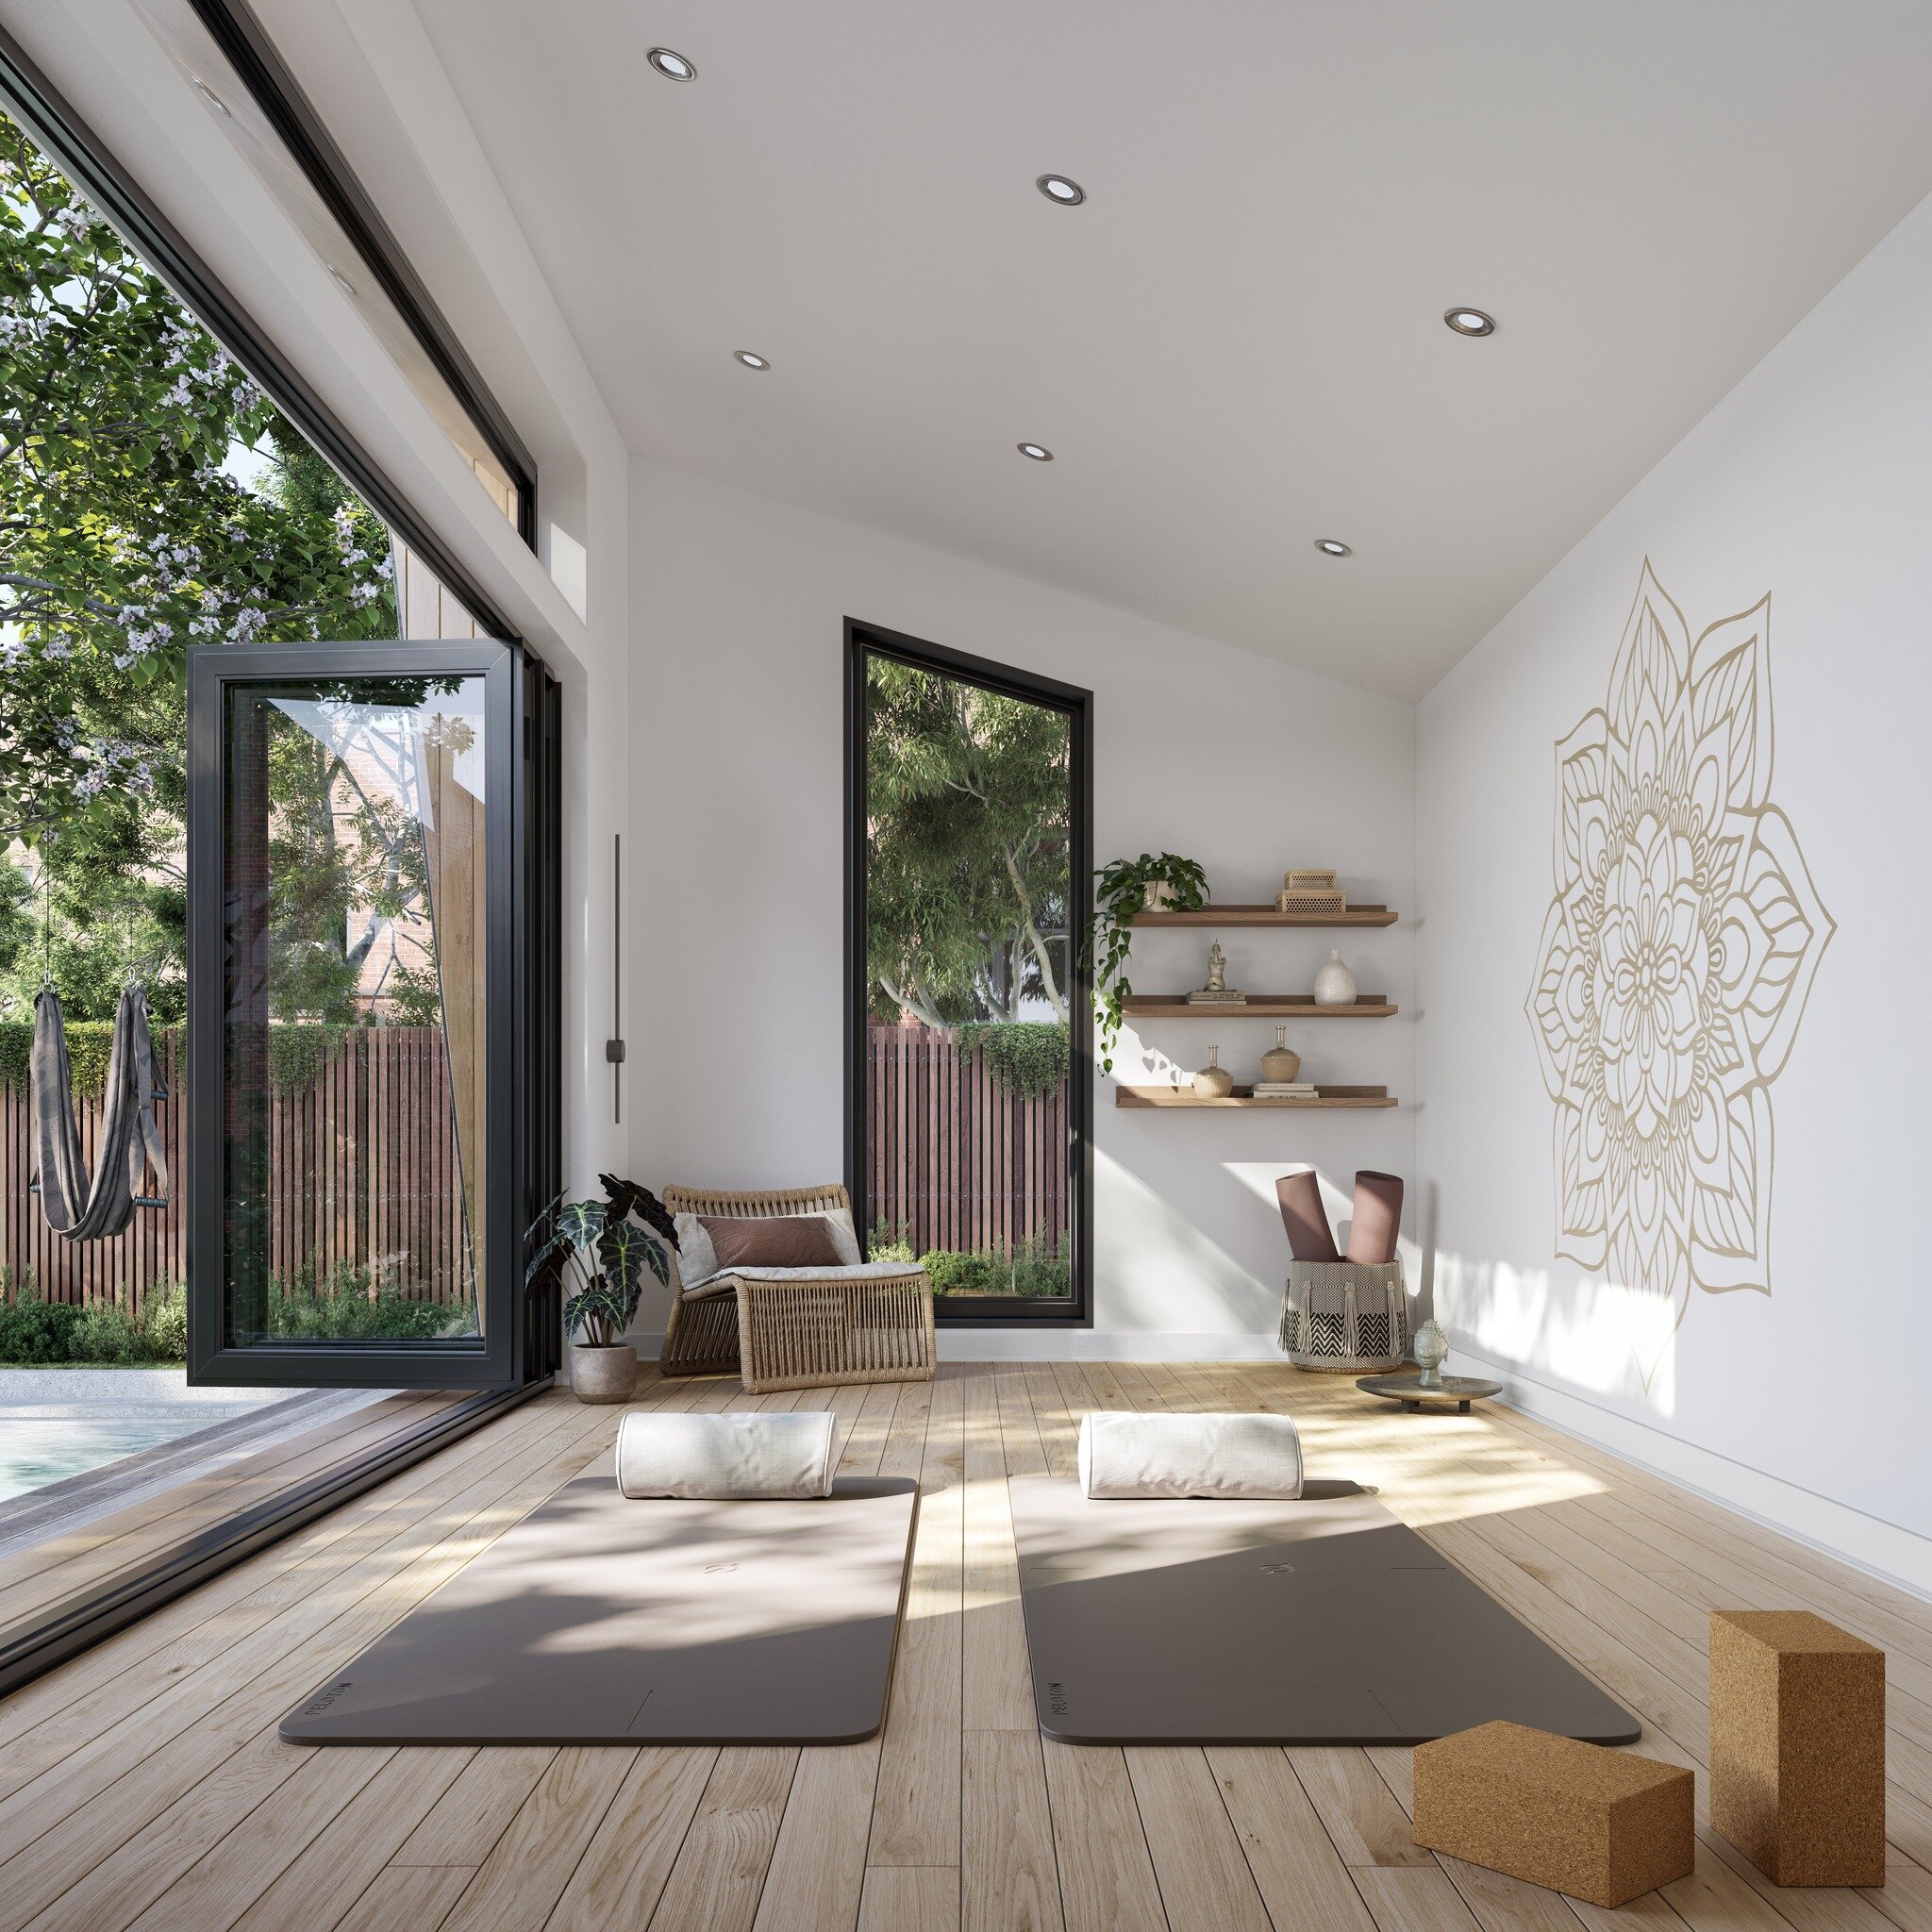 Our latest project is a dream come true for all yoga enthusiasts - a serene yoga room nestled in the tranquility of a backyard setting.

▪️ Visualization: @darkroom_graphicstudio
▪️ Artist: @boonoonoonus 
▪️ Software: 3D Max, Corona Renderer, Photosh